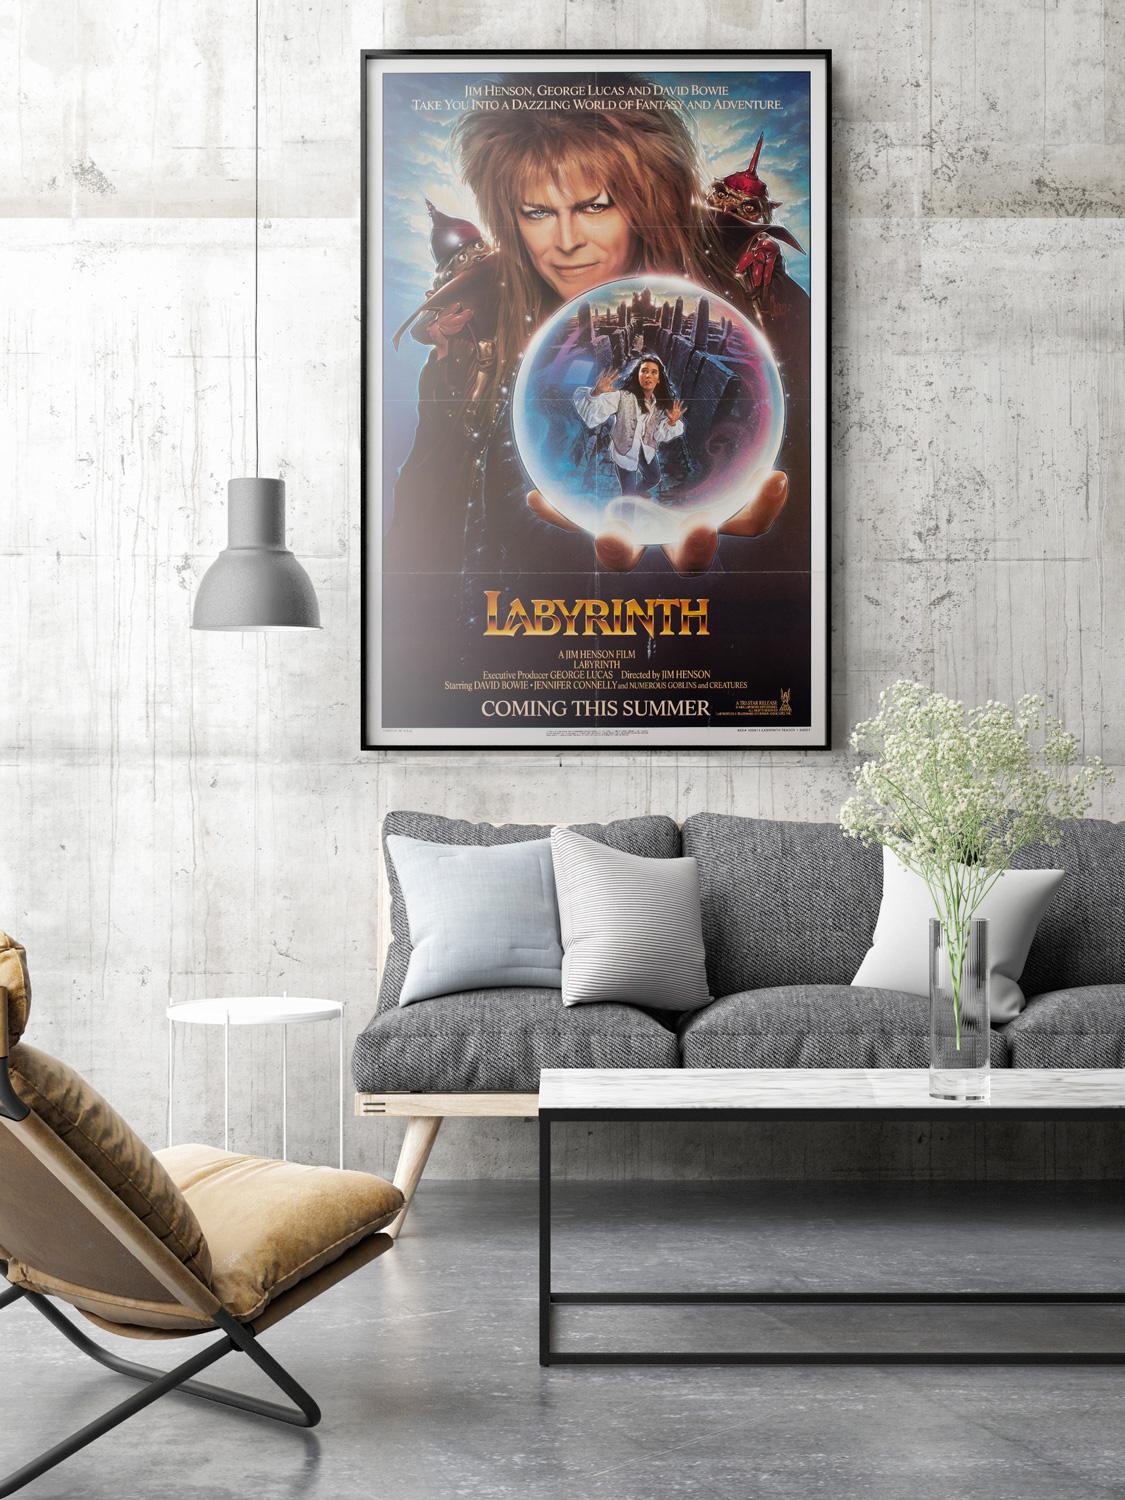 The wonderful country-of-origin teaser film poster for Jim Henson's firm family favourite Labyrinth starring David Bowie and Jennifer Connelly. Very beautifully illustrated by Steven Chorney. 

In Labyrinth sixteen-year-old Sarah (Connelly) is